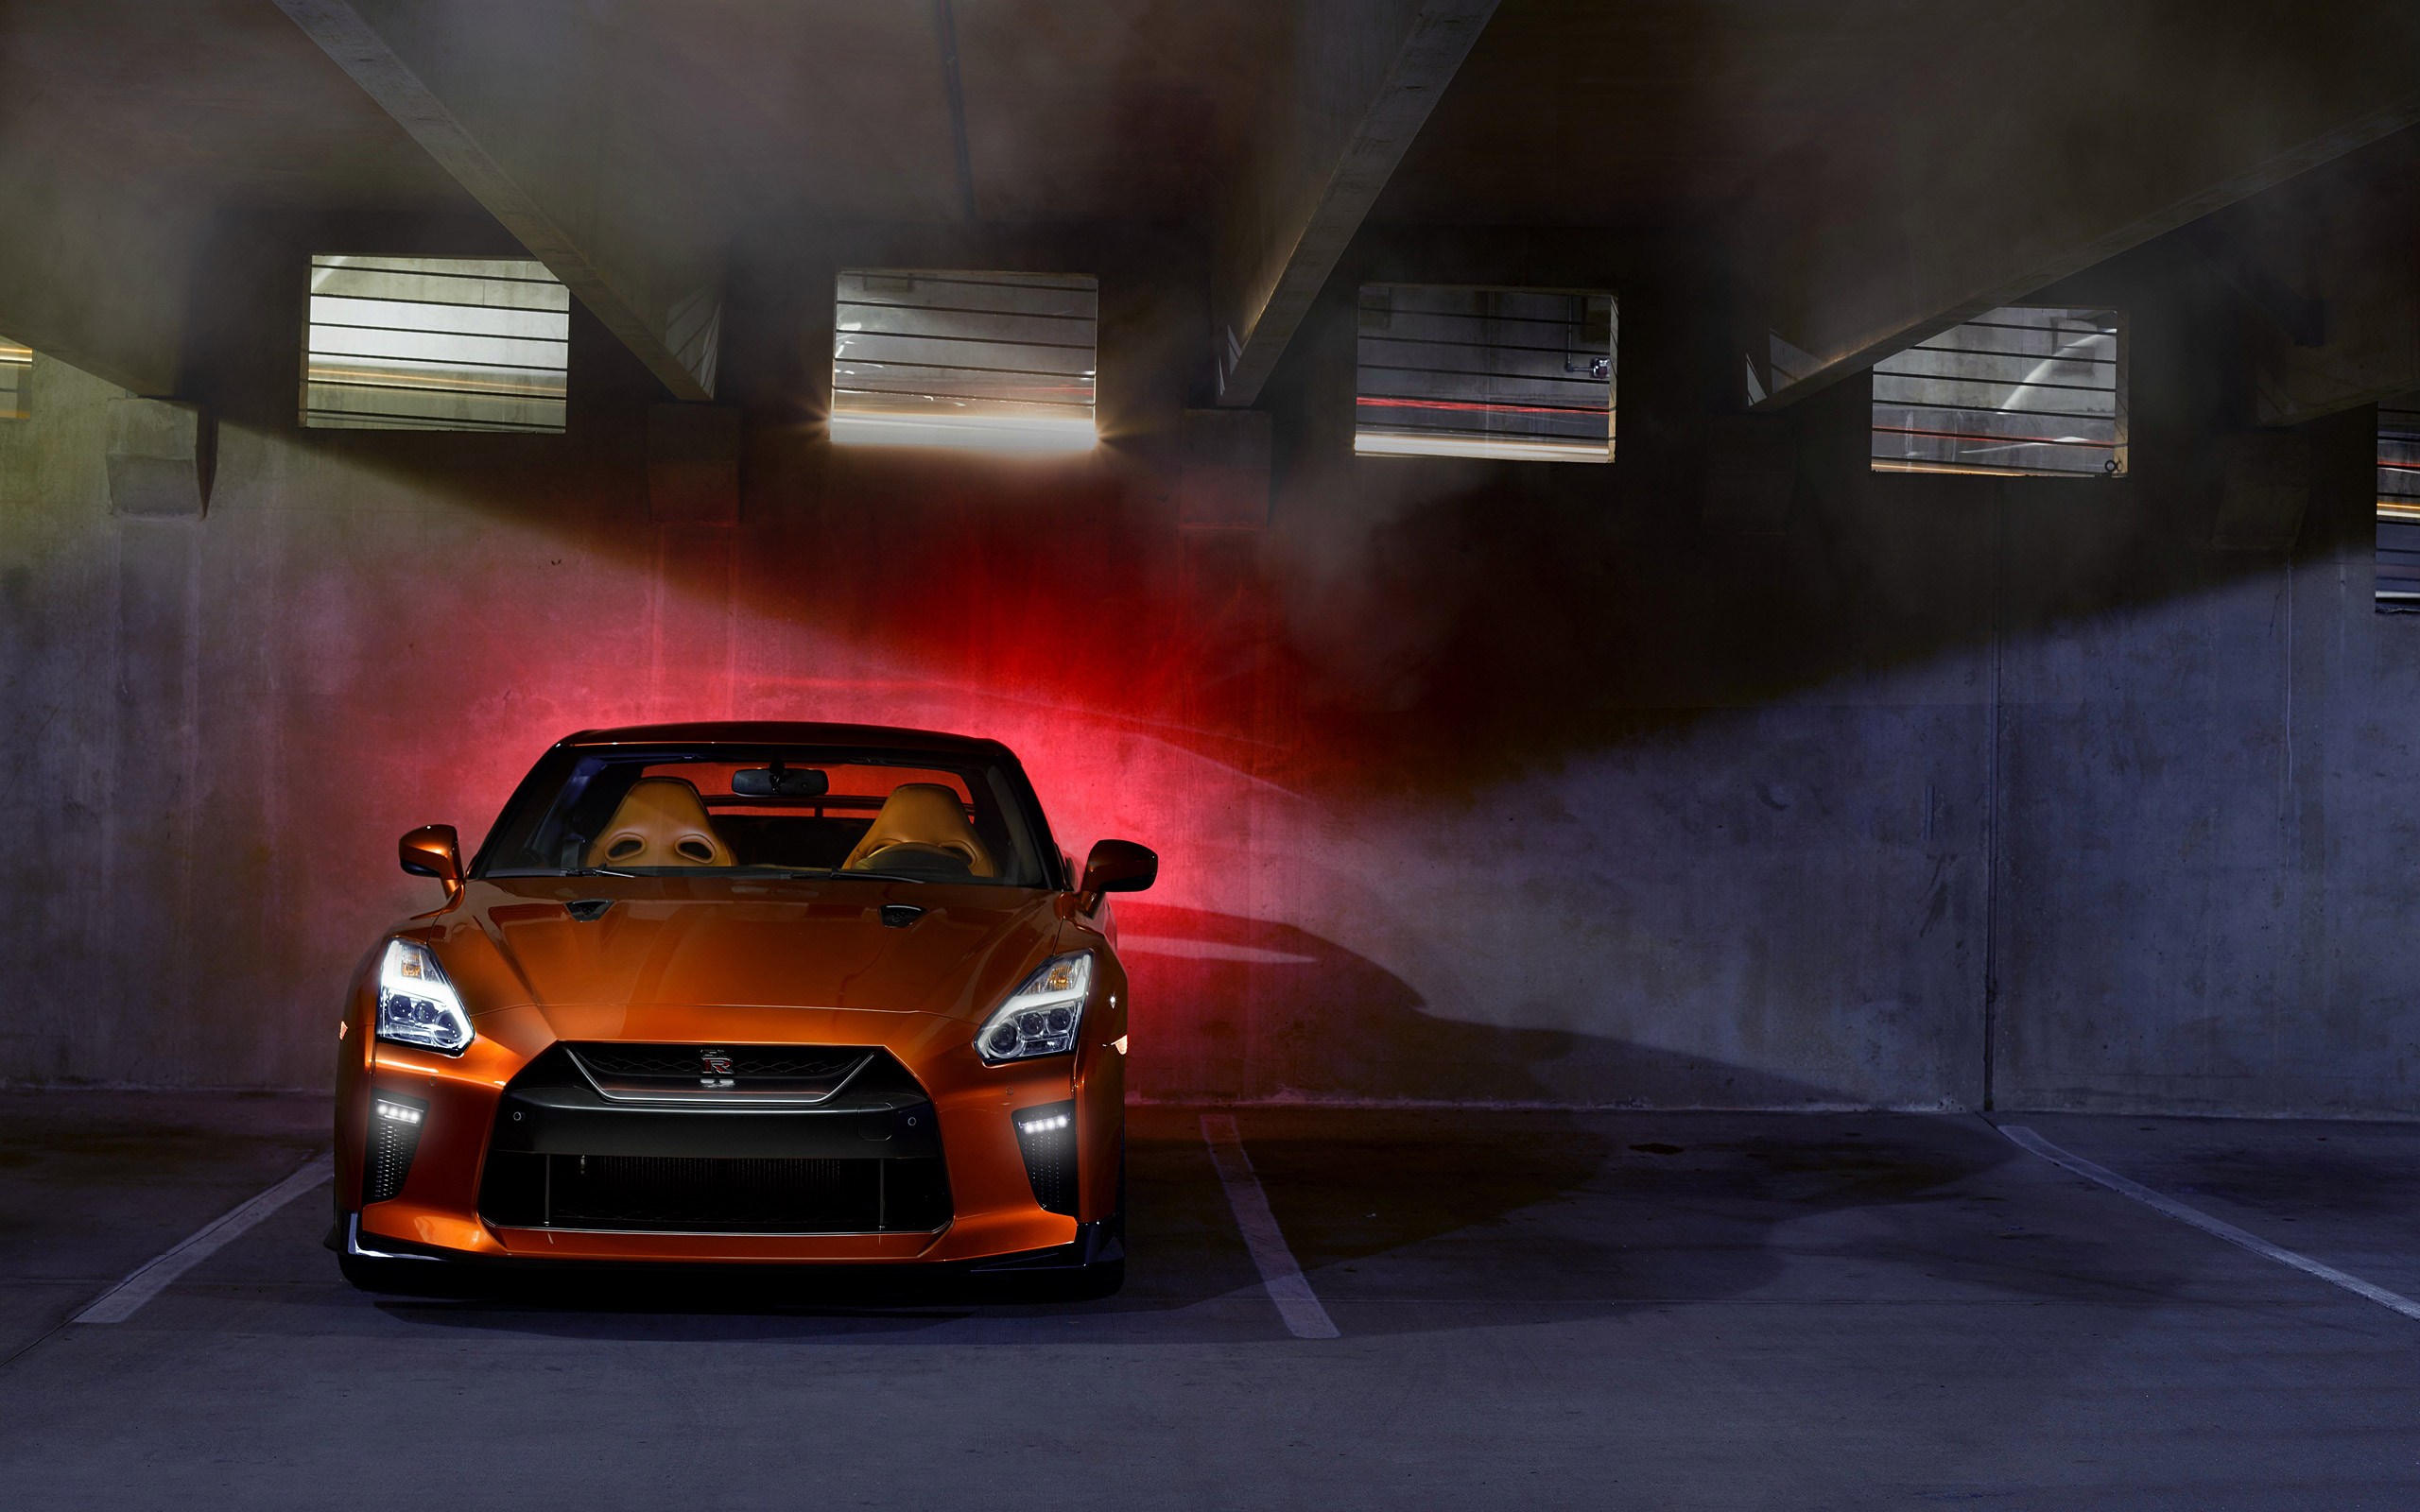 General 2560x1600 Nissan GT-R car vehicle parking lot supercars orange cars Nissan Japanese cars frontal view headlights